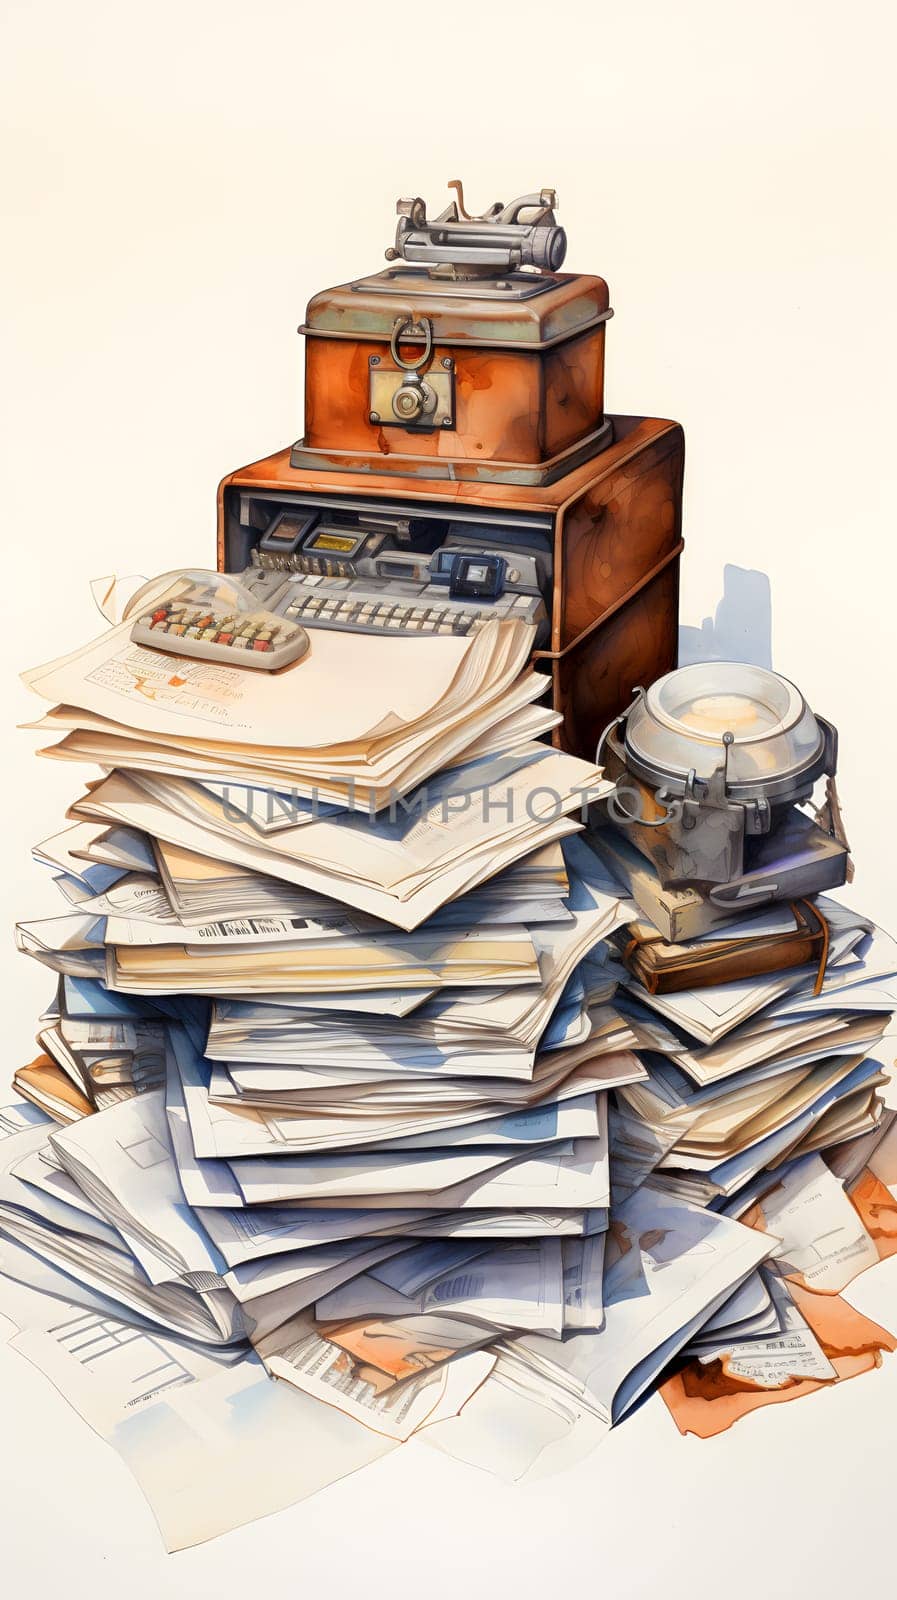 A visually striking image of a pile of papers stacked high, with a telephone resting on the topmost sheet. The contrast between the chaotic papers and the sleek telephone creates an interesting composition.